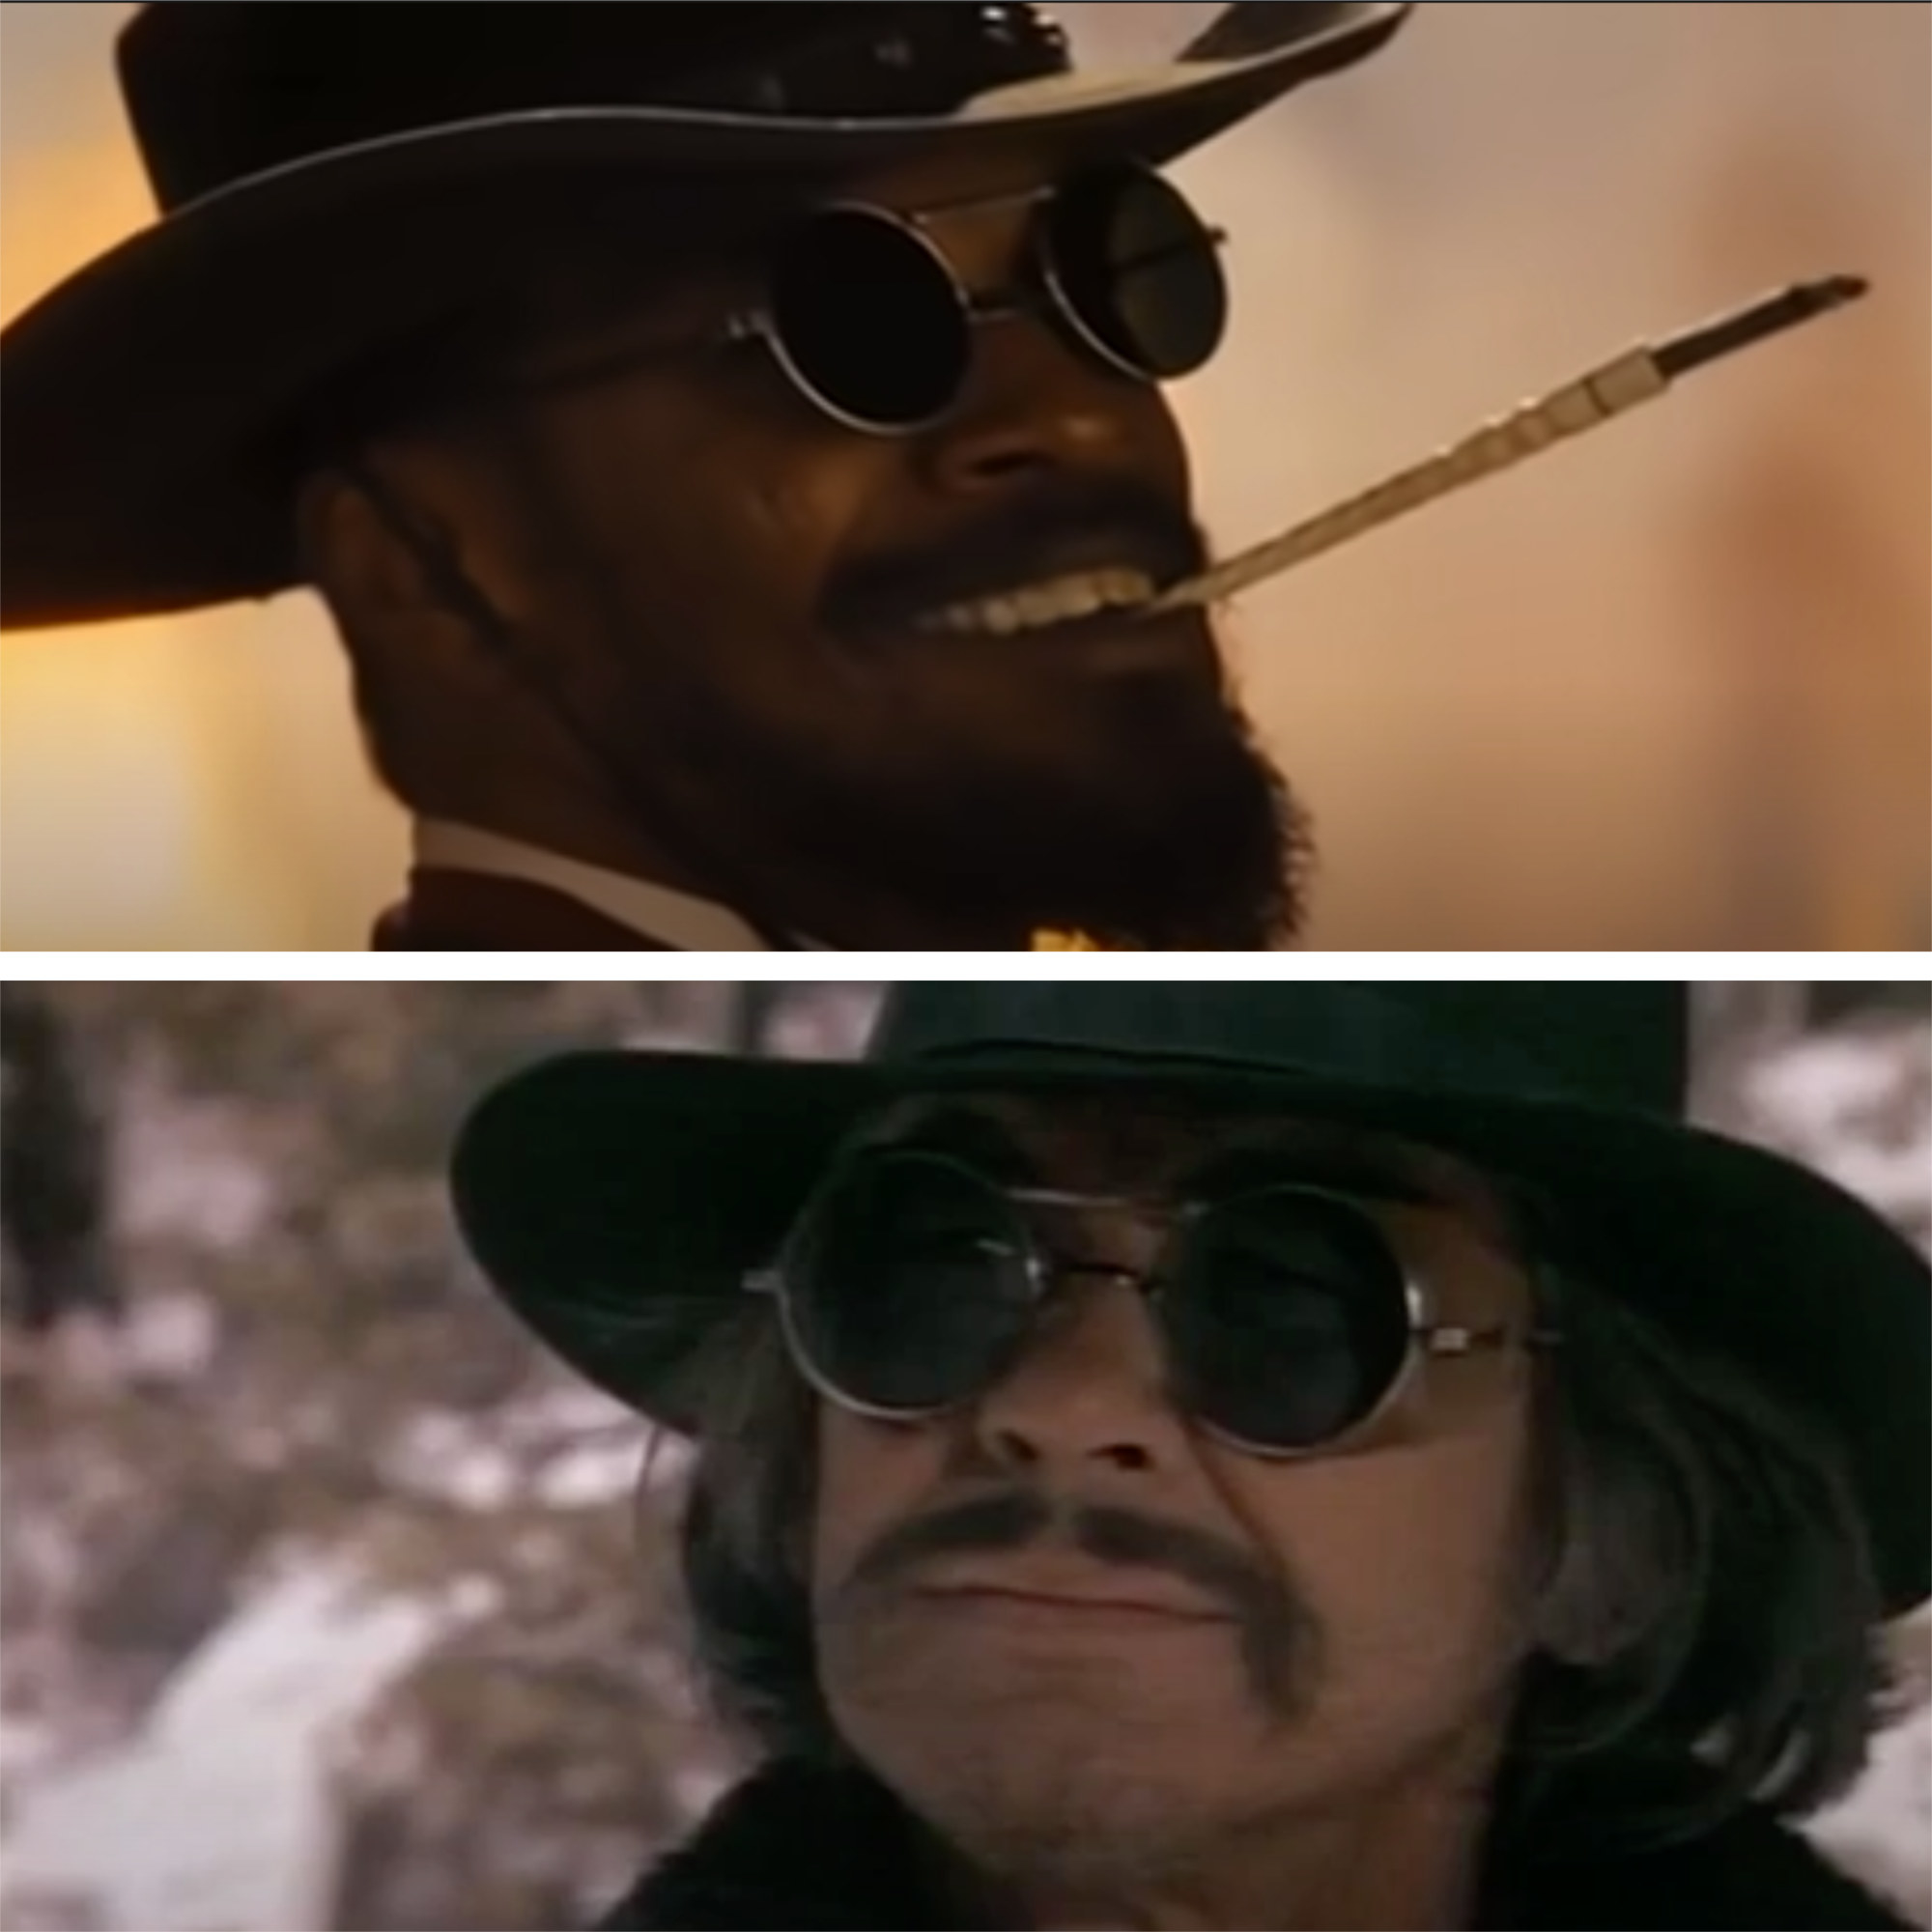 Similar sunglasses in Django Unchained and The White Buffalo films